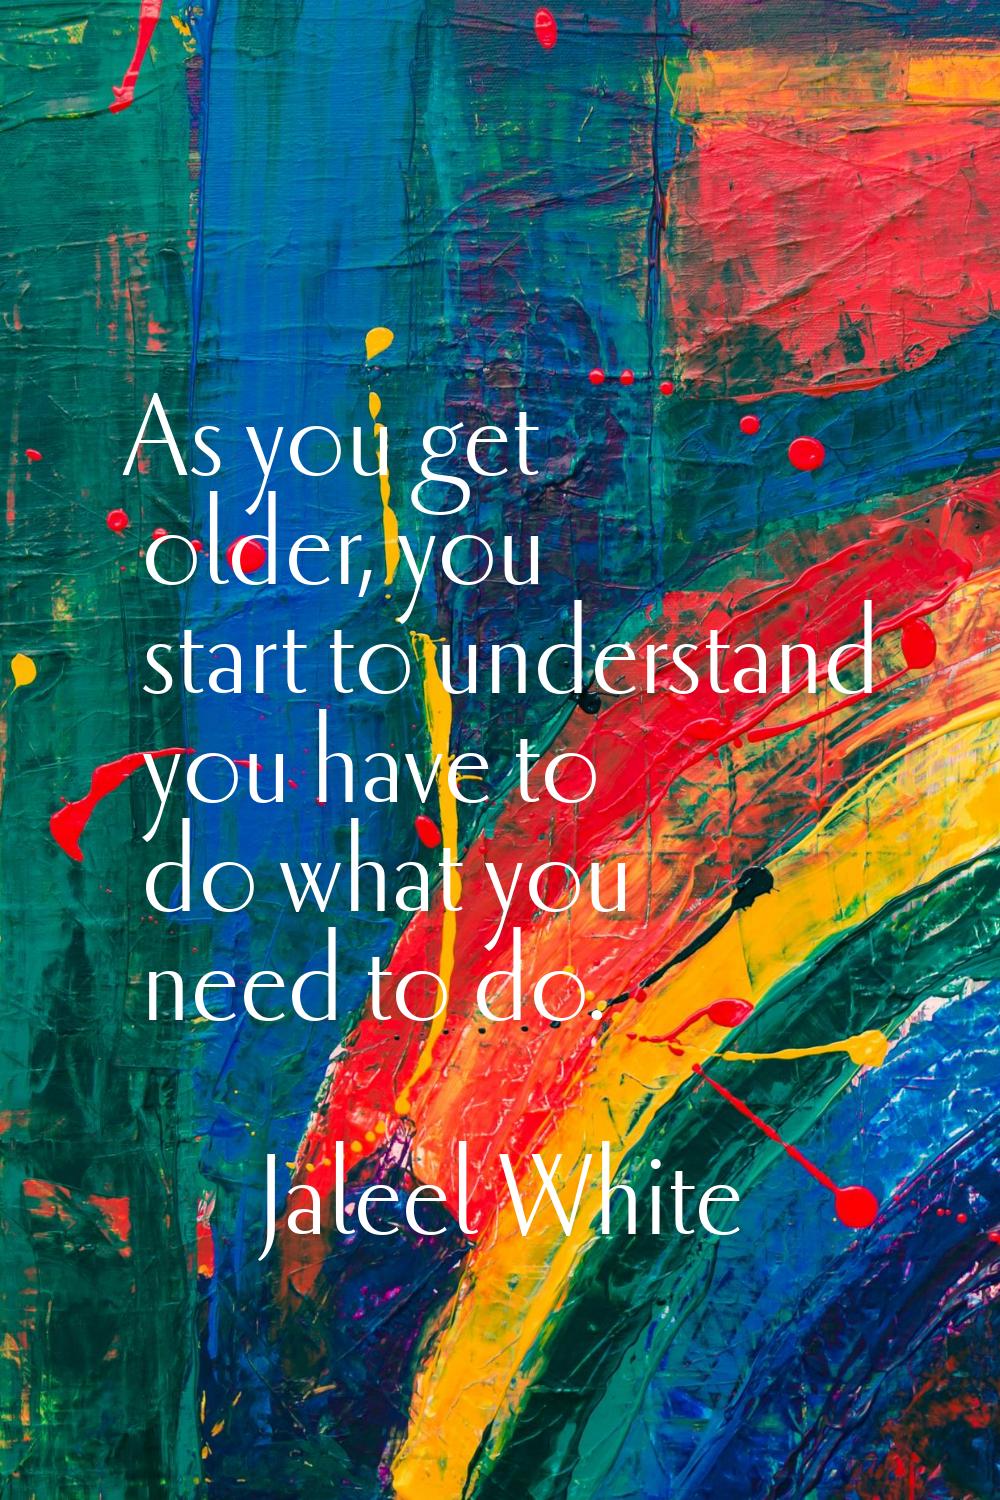 As you get older, you start to understand you have to do what you need to do.